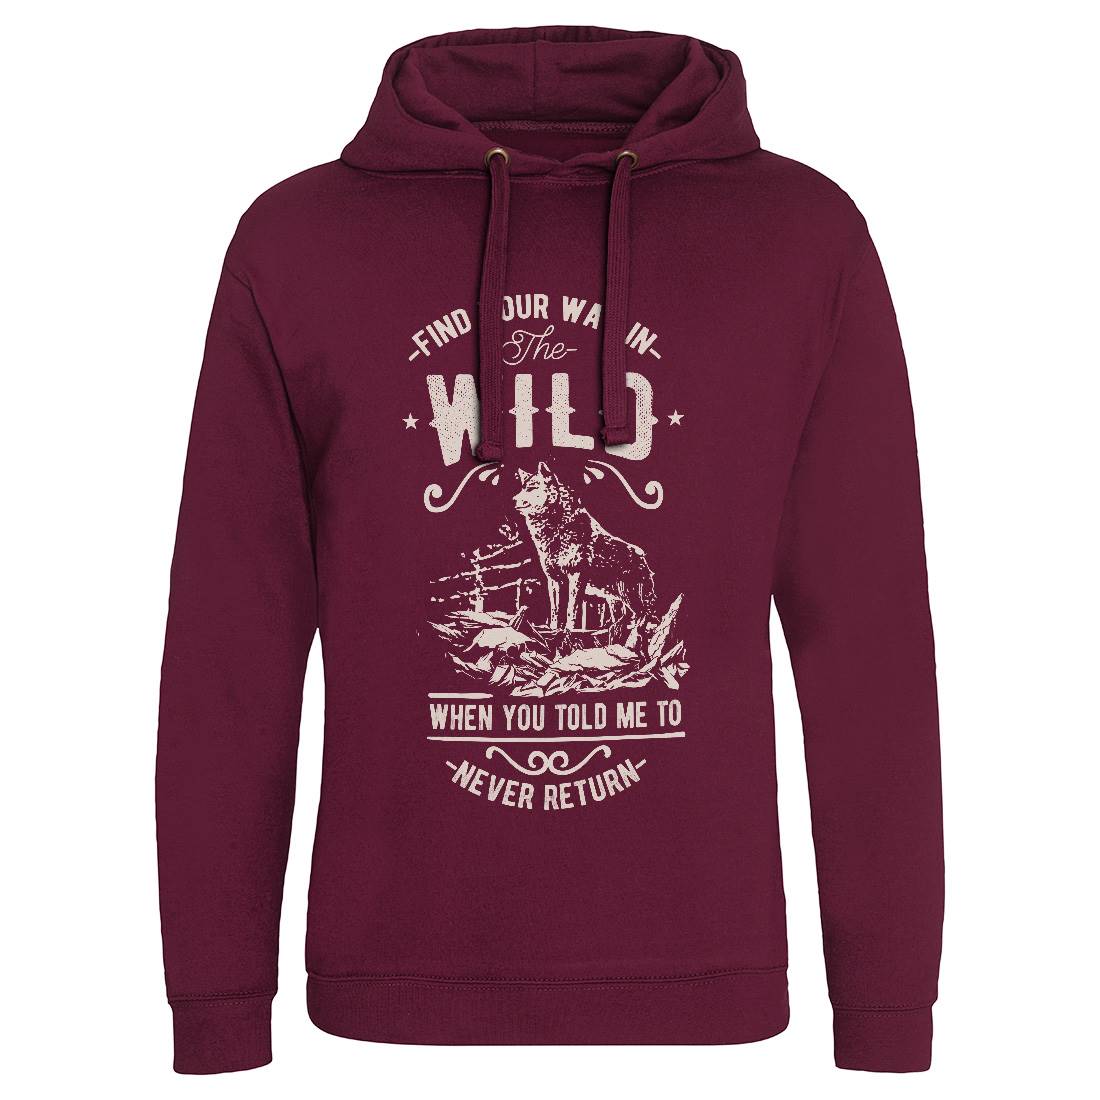 Find Your Way In The Wild Mens Hoodie Without Pocket Nature C932